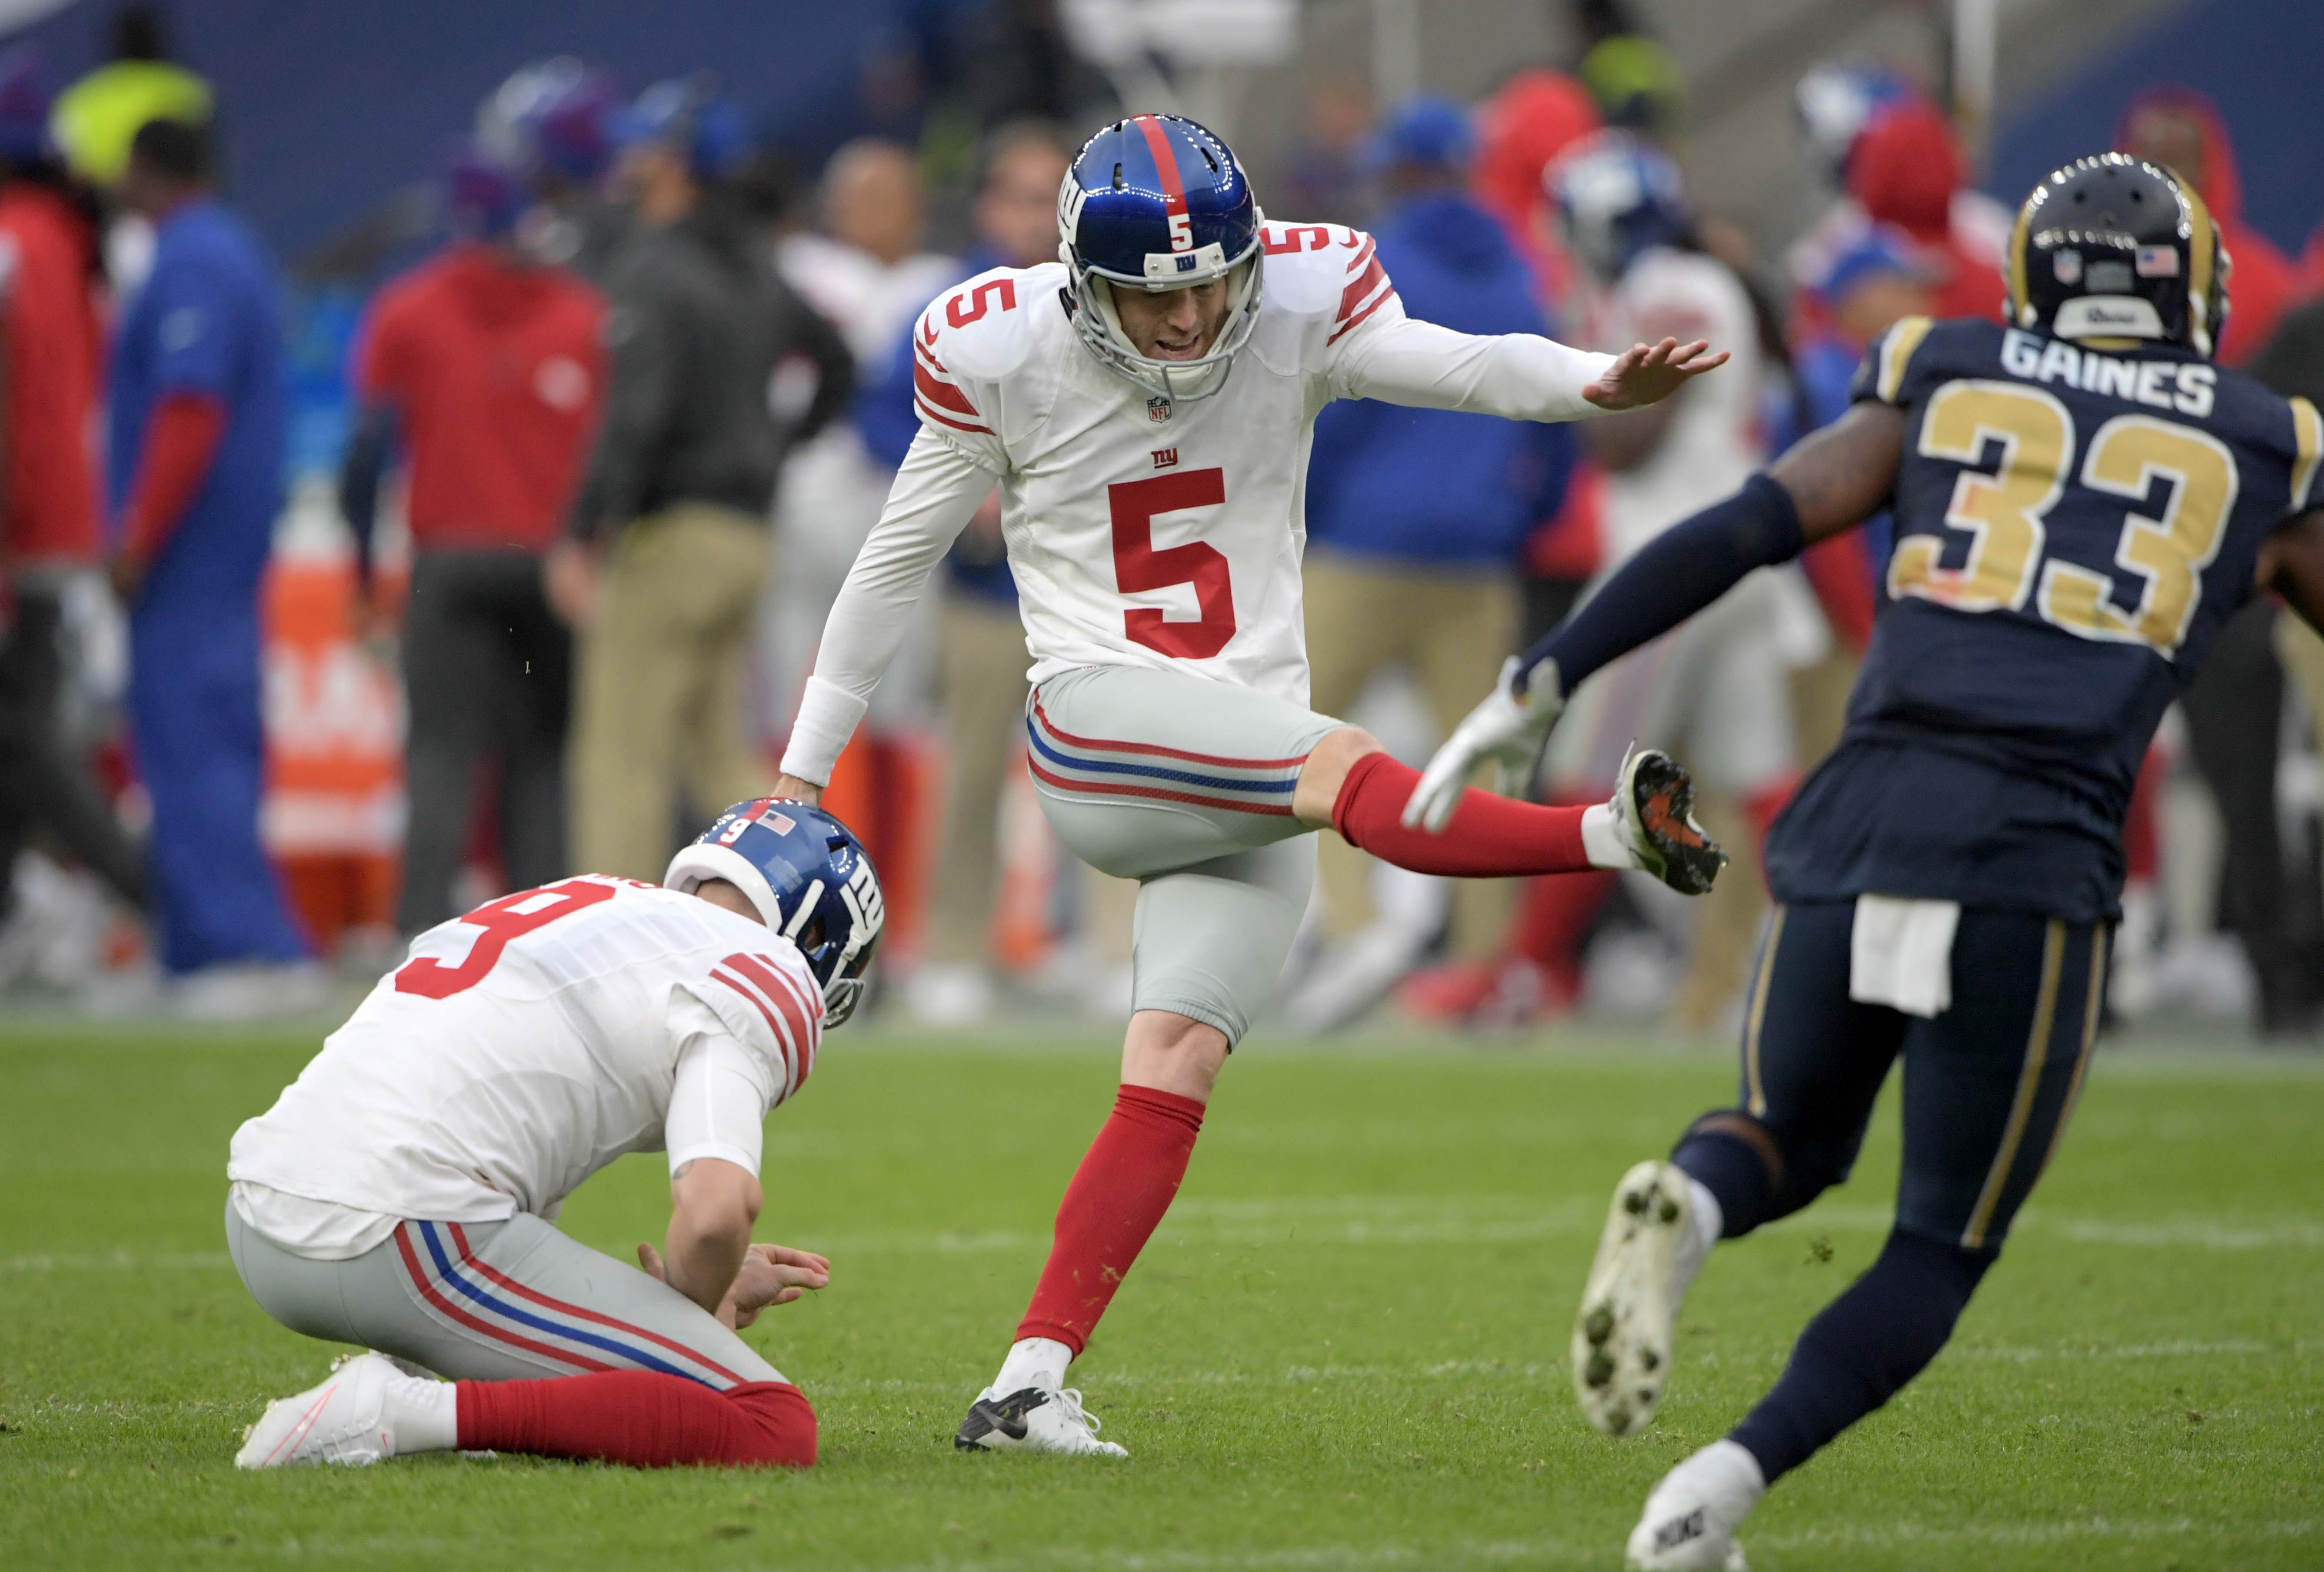 New York Giants' Brad Wing shows off braces, gets on refs 2